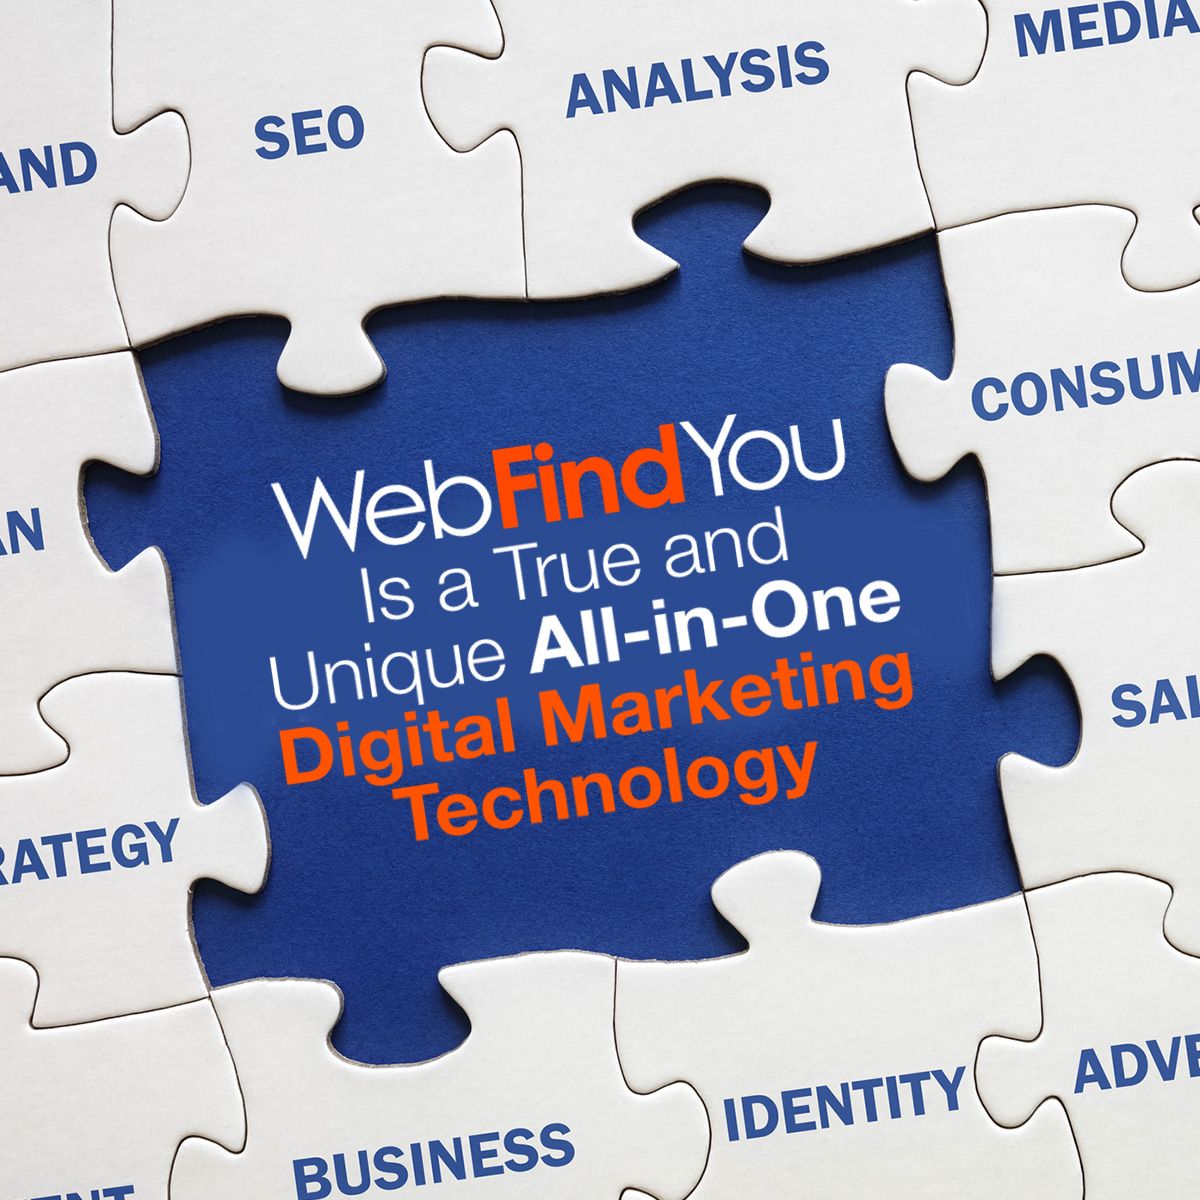 WebFindYou is a True and Unique All-in-One Digital Marketing Technology